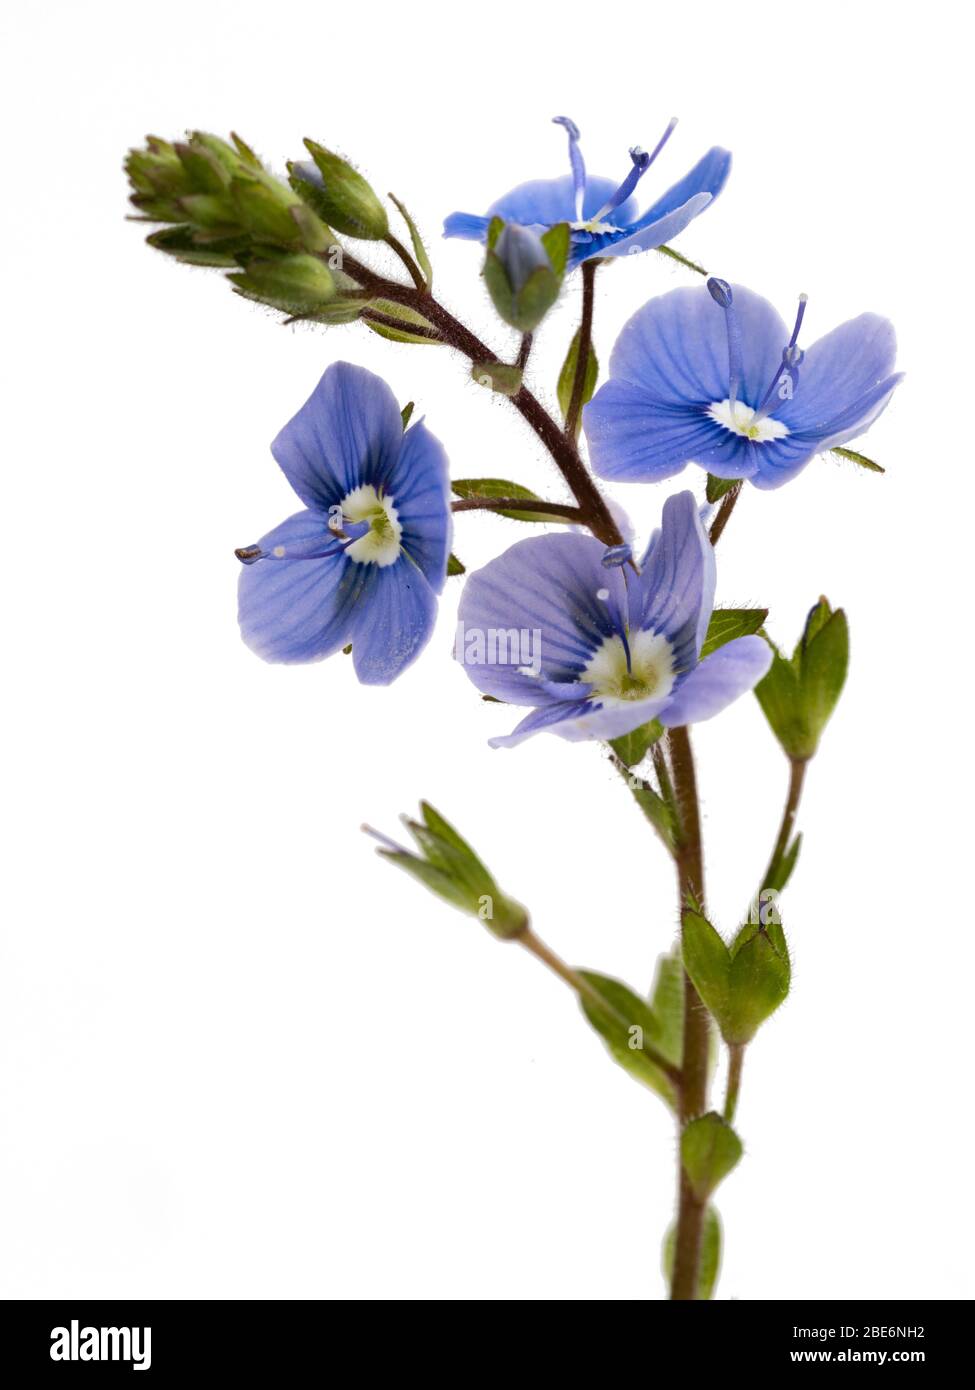 Stem and small blue flowers of the creeping UK wildflower, germander speedwell, Veronica chamaedrys, on a white background Stock Photo